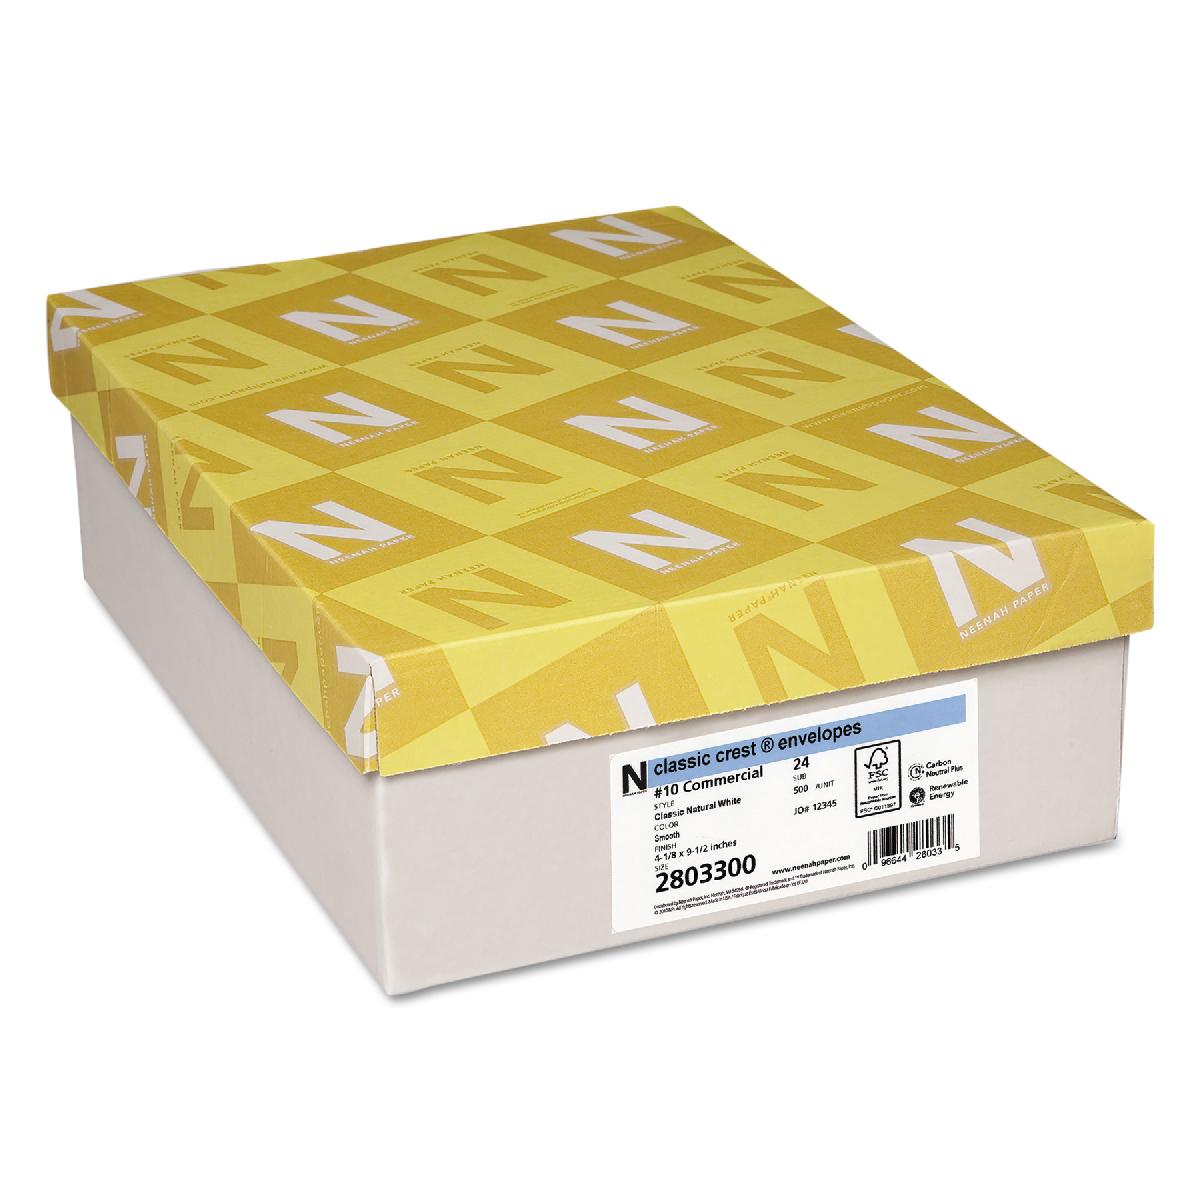 Neenah Paper® Classic Crest Classic Natural White Smooth 24 lb. Writing No. 10 Envelopes 500 per Box